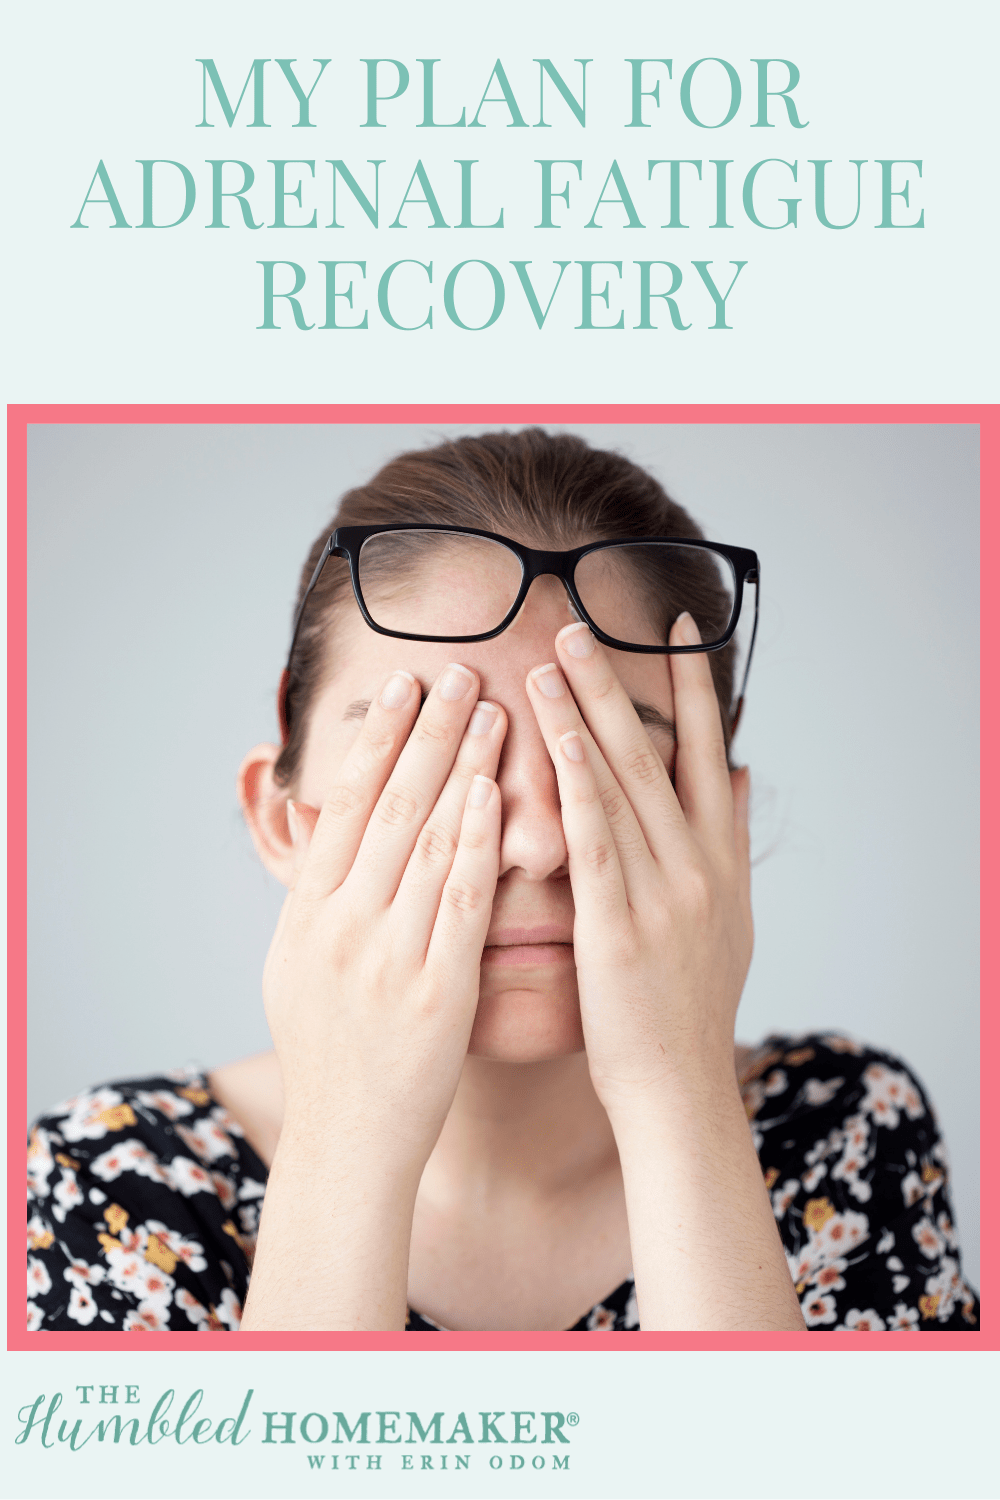 My Plan for Adrenal Fatigue Recovery